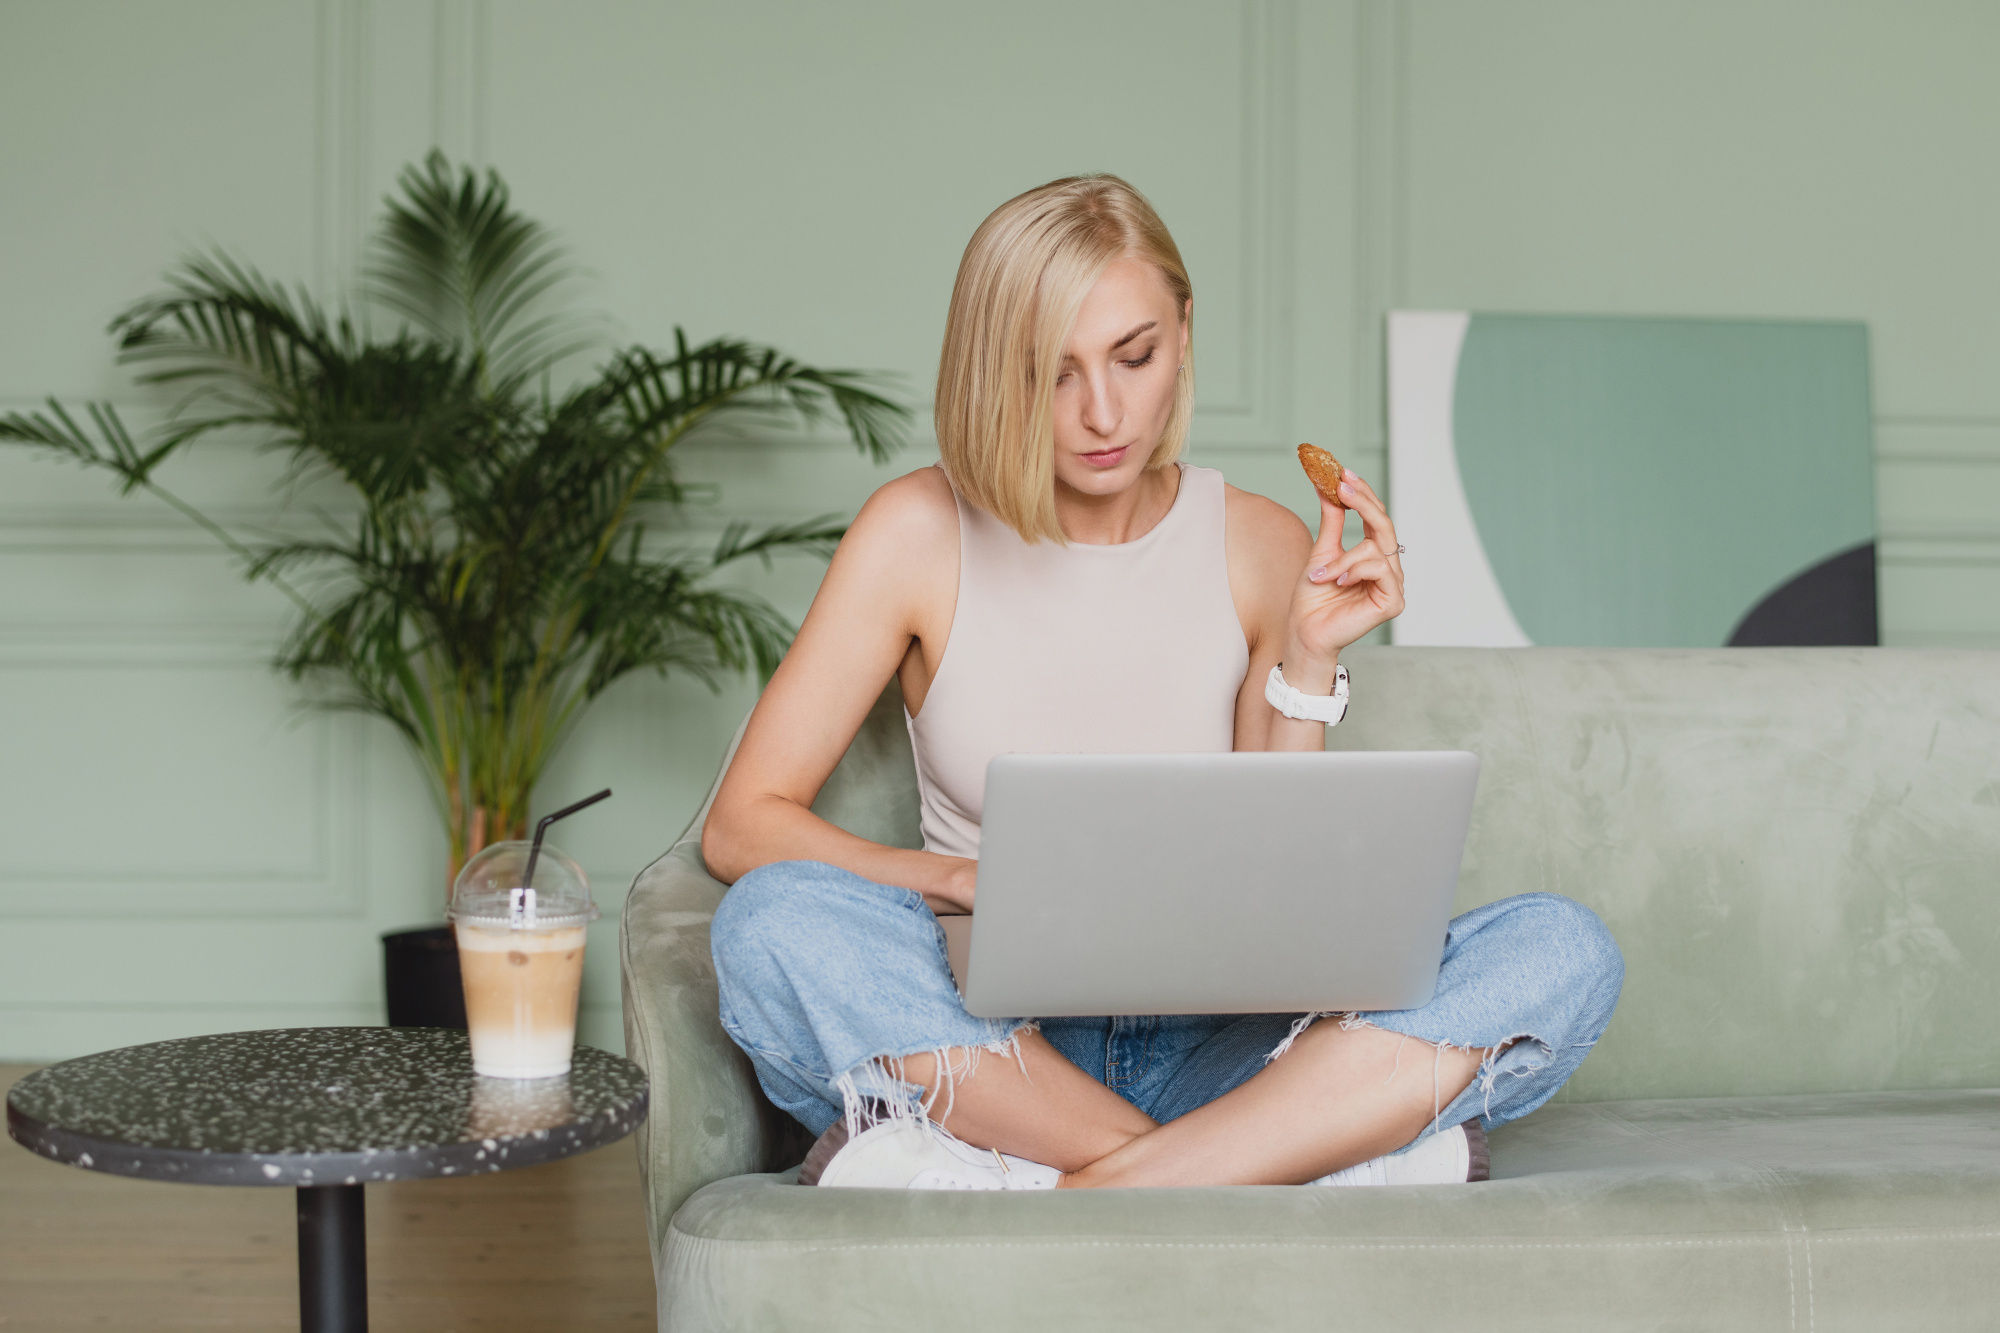 common menopause questions, Blonde woman with chin-length hair in denim cross-legged on couch